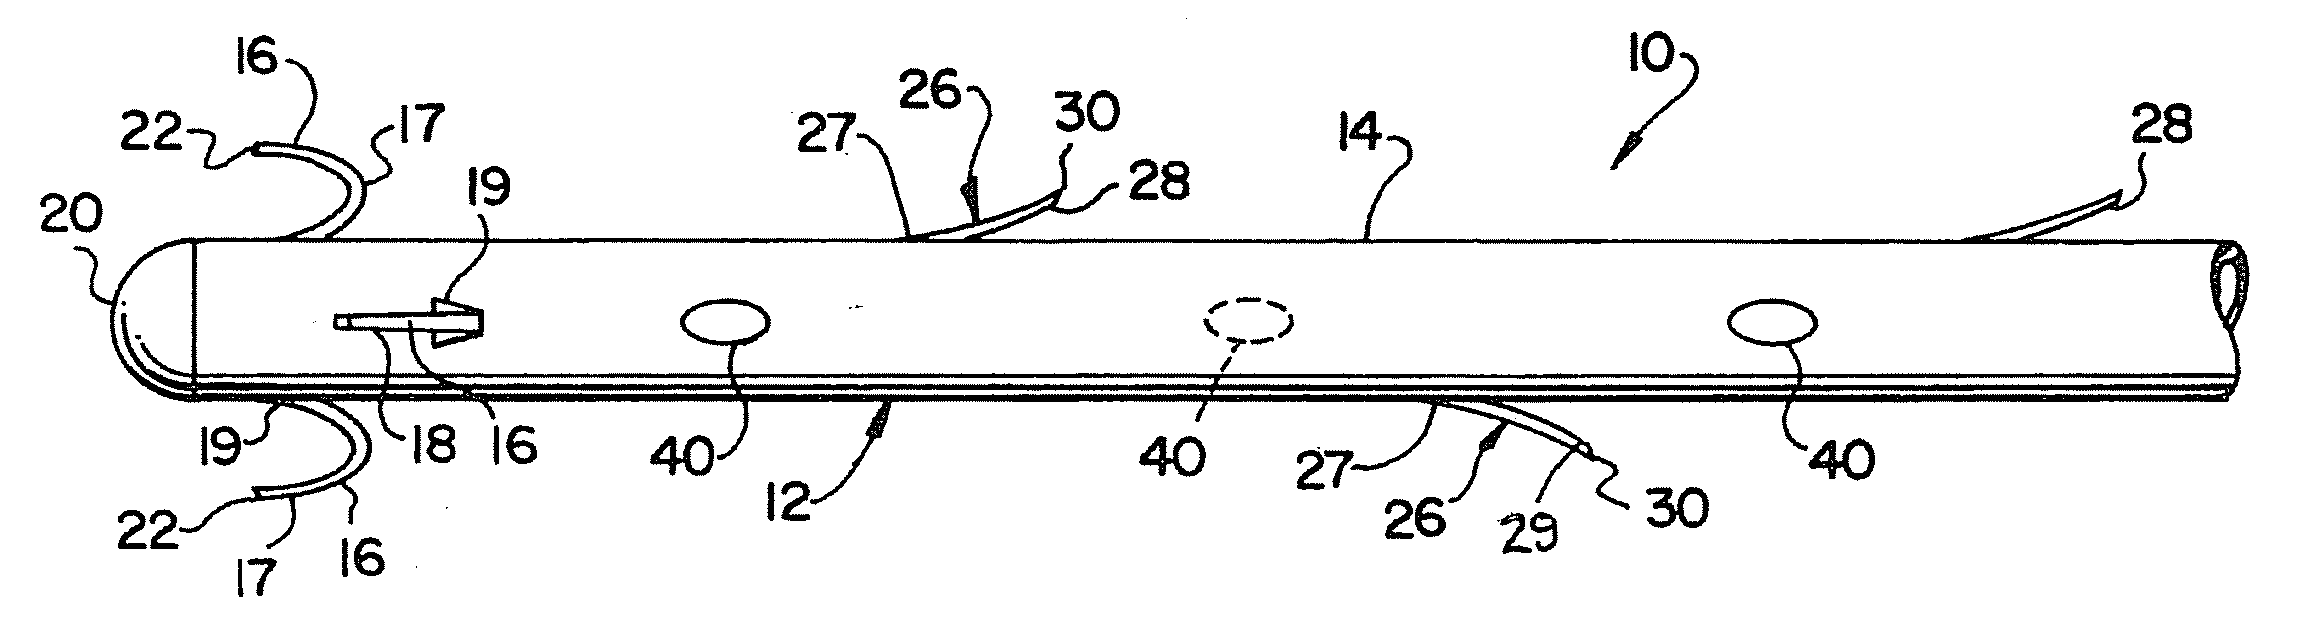 Device with removable projections